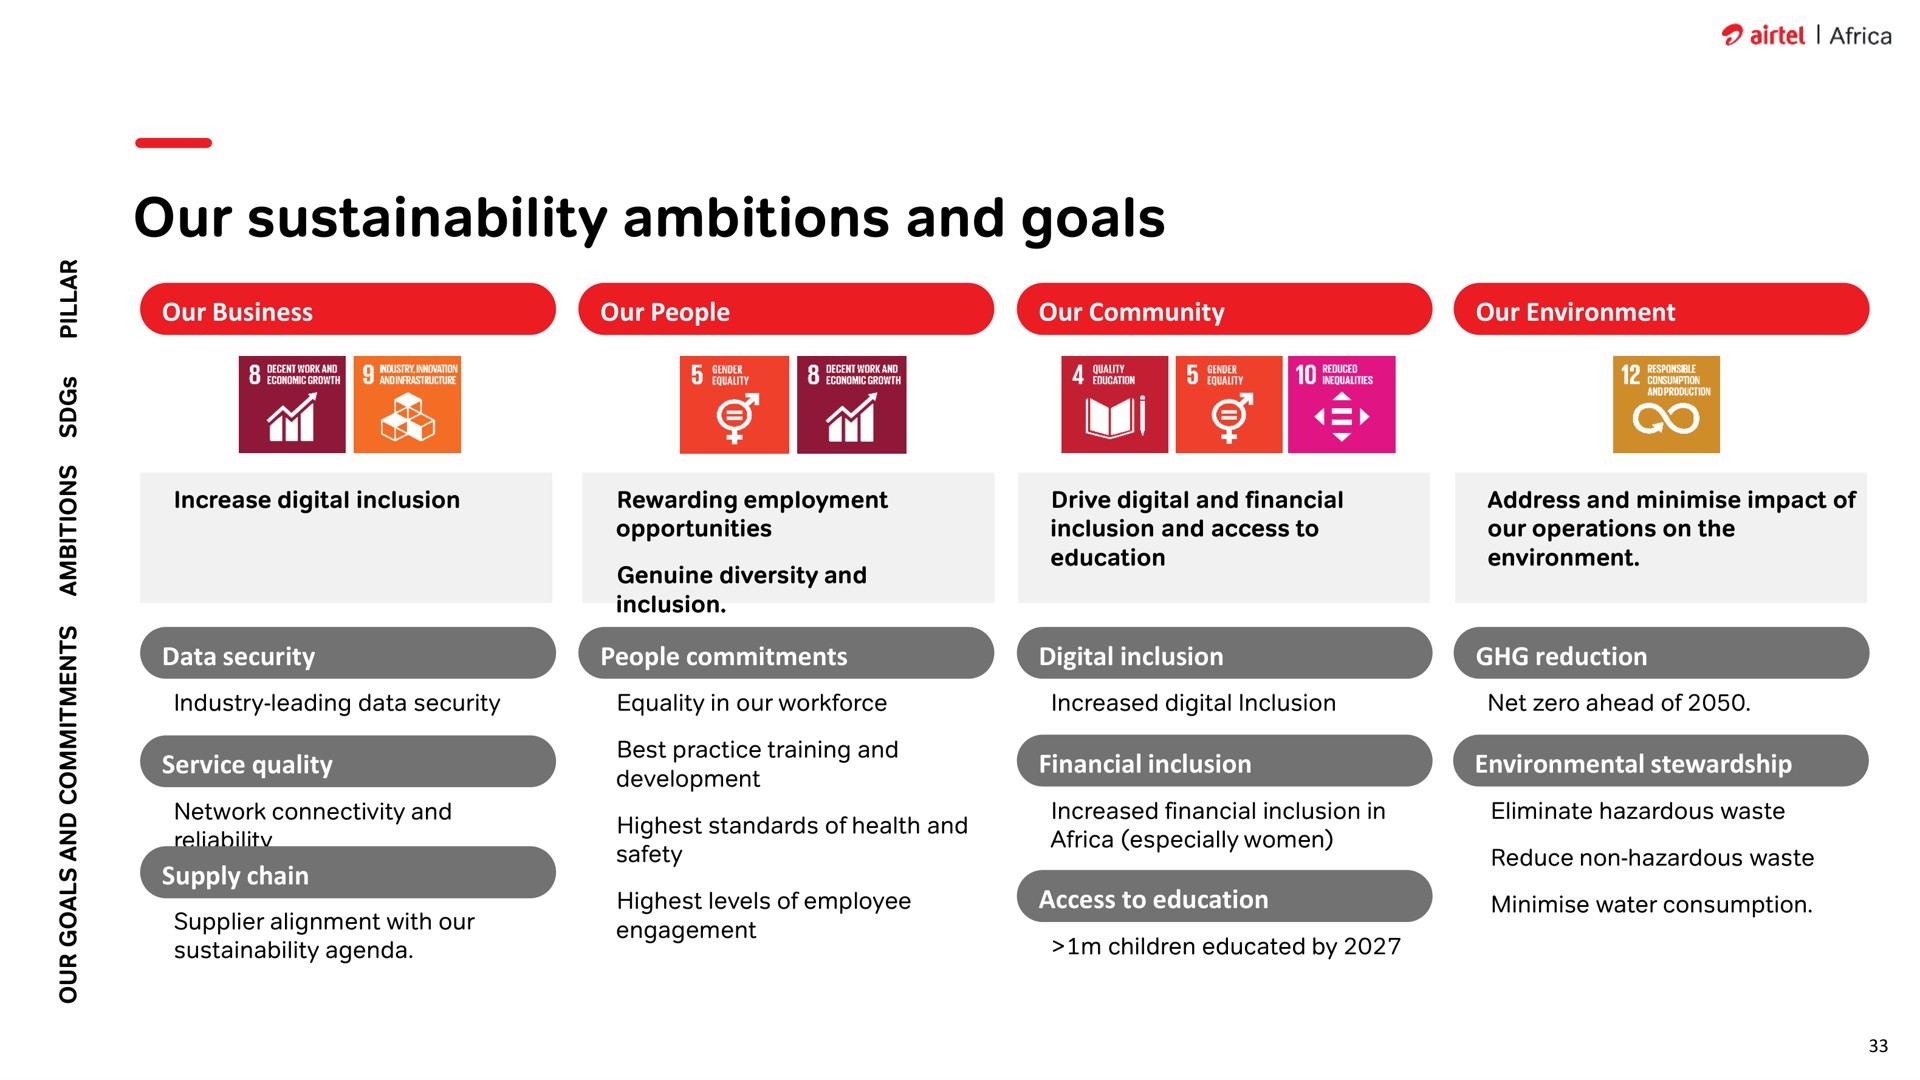 our ambitions and goals | Airtel Africa